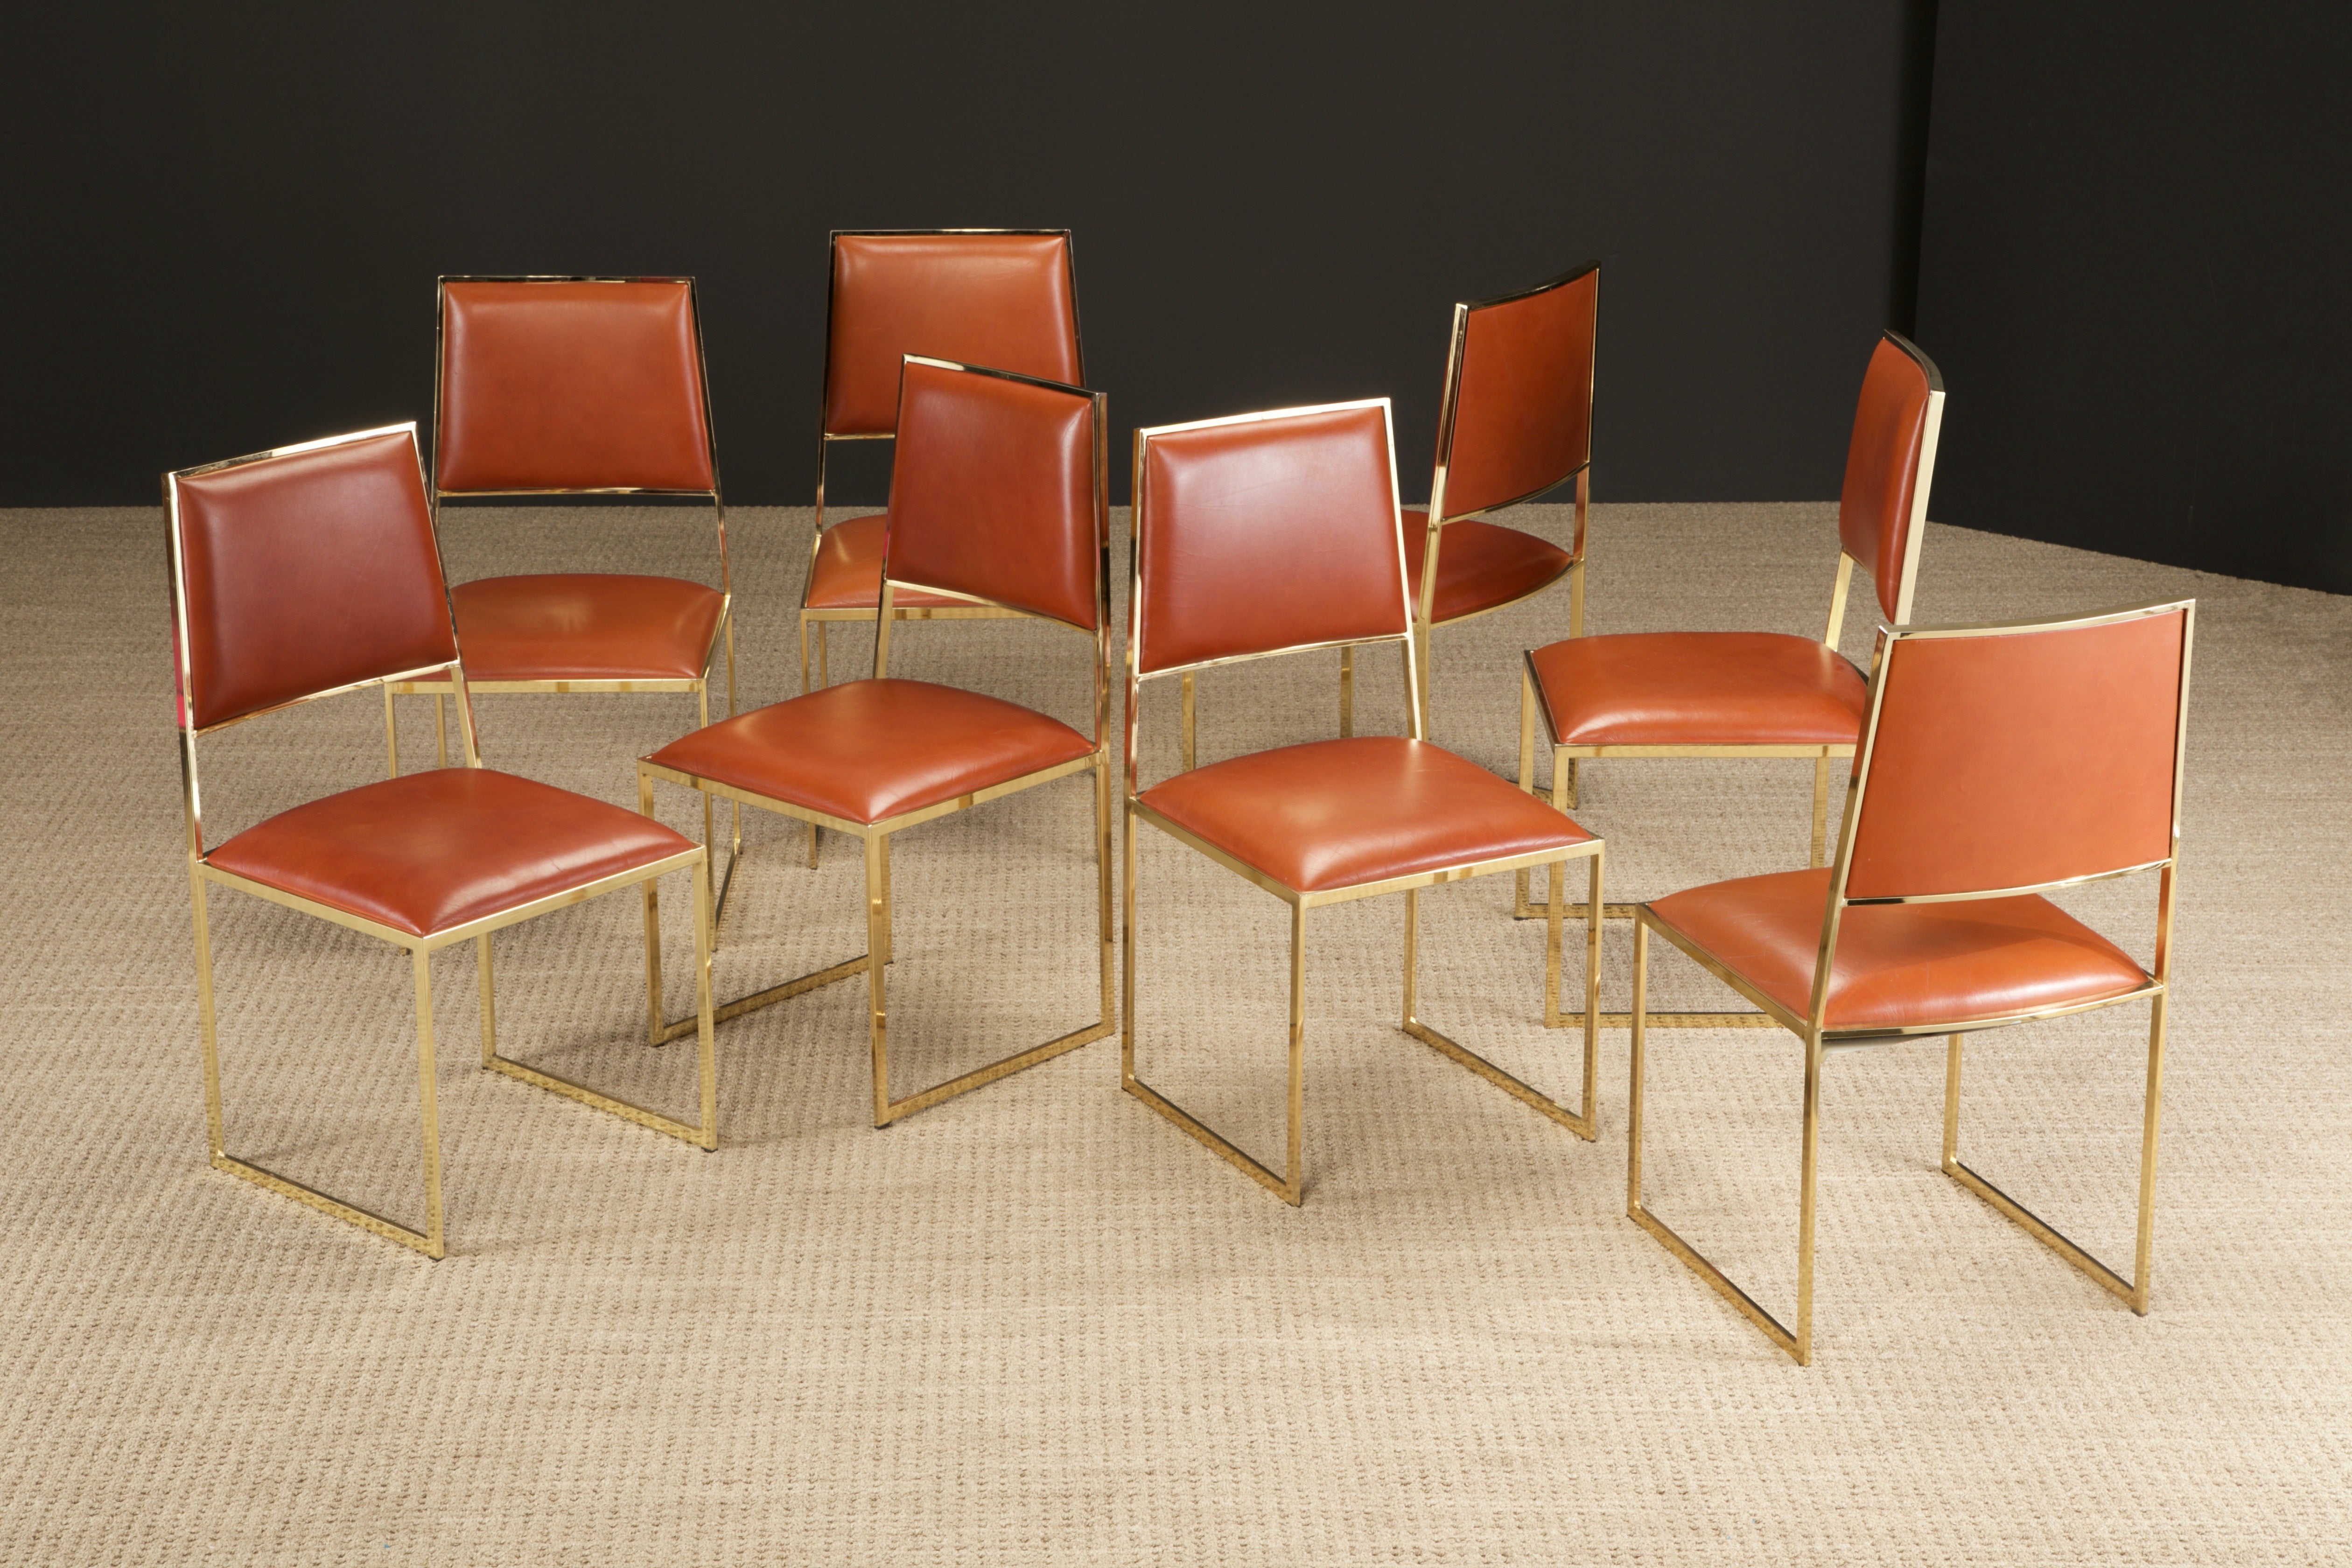 A beautiful set of eight (8) dining chairs by Willy Rizzo for Cidue, Italy circa 1970, featuring gorgeous cubist brass frames and cognac colored leather. Signed with Cidue labels reading 'Made in Italy, Cidue, elementi d'arredo - carrè / vi'.